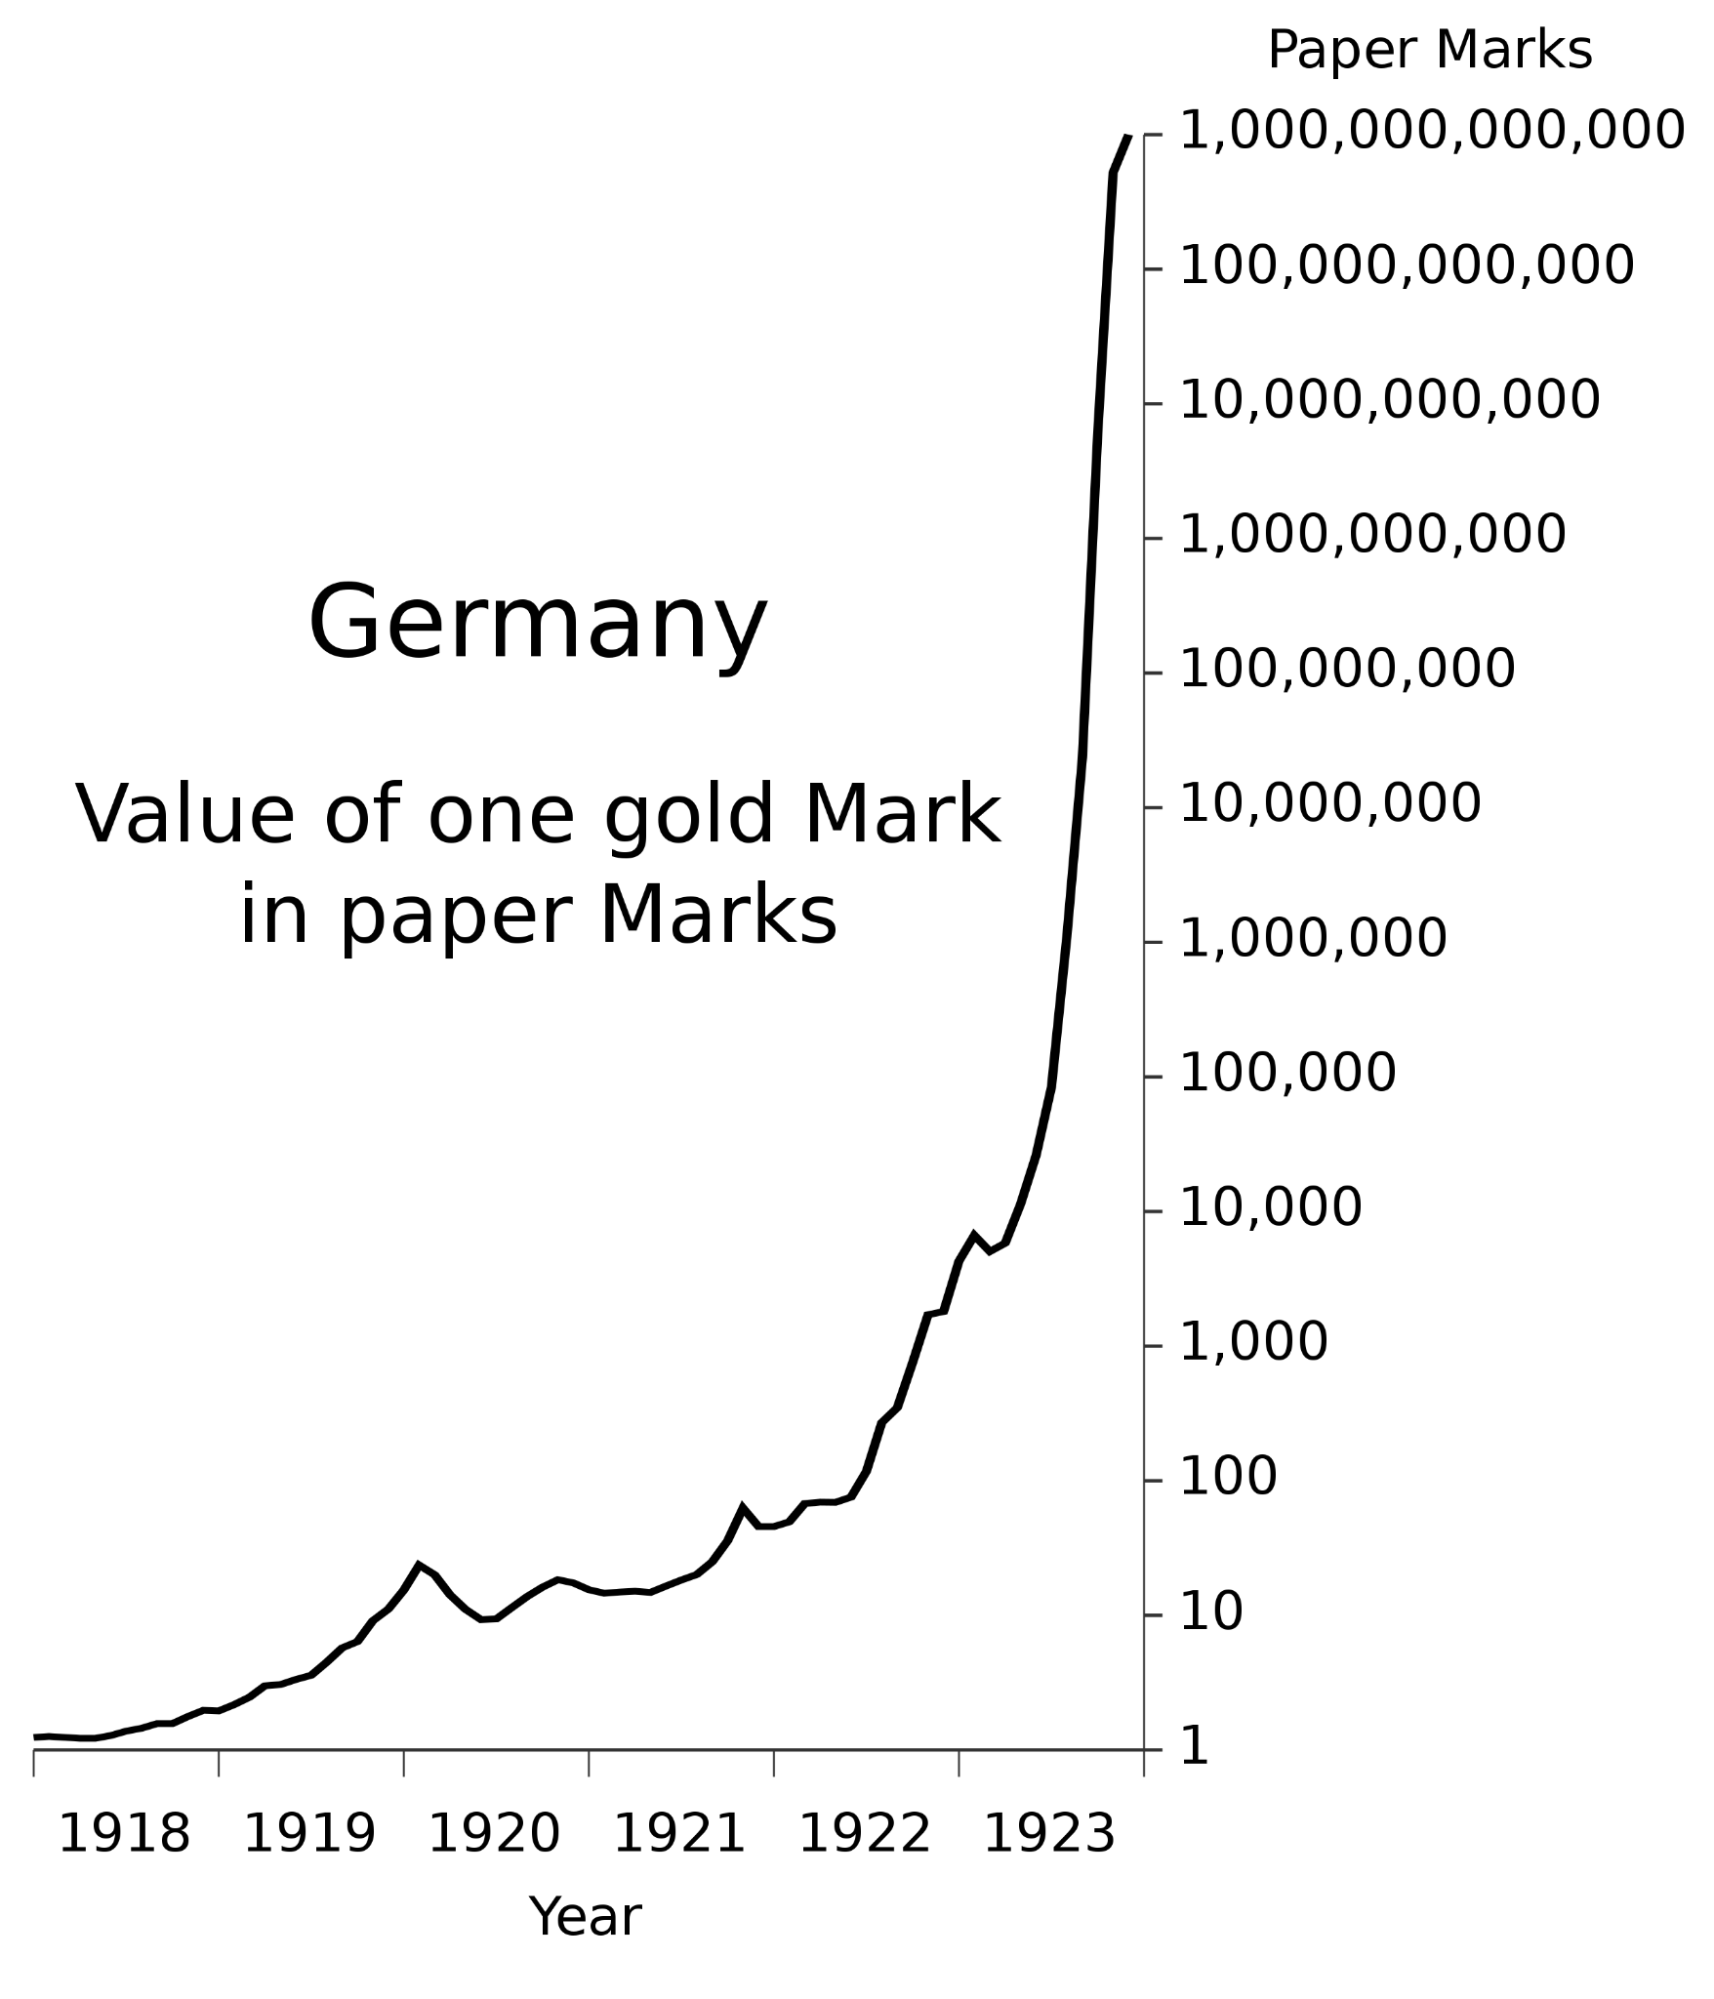 Value of on gold Mark in paper Marks in Germany